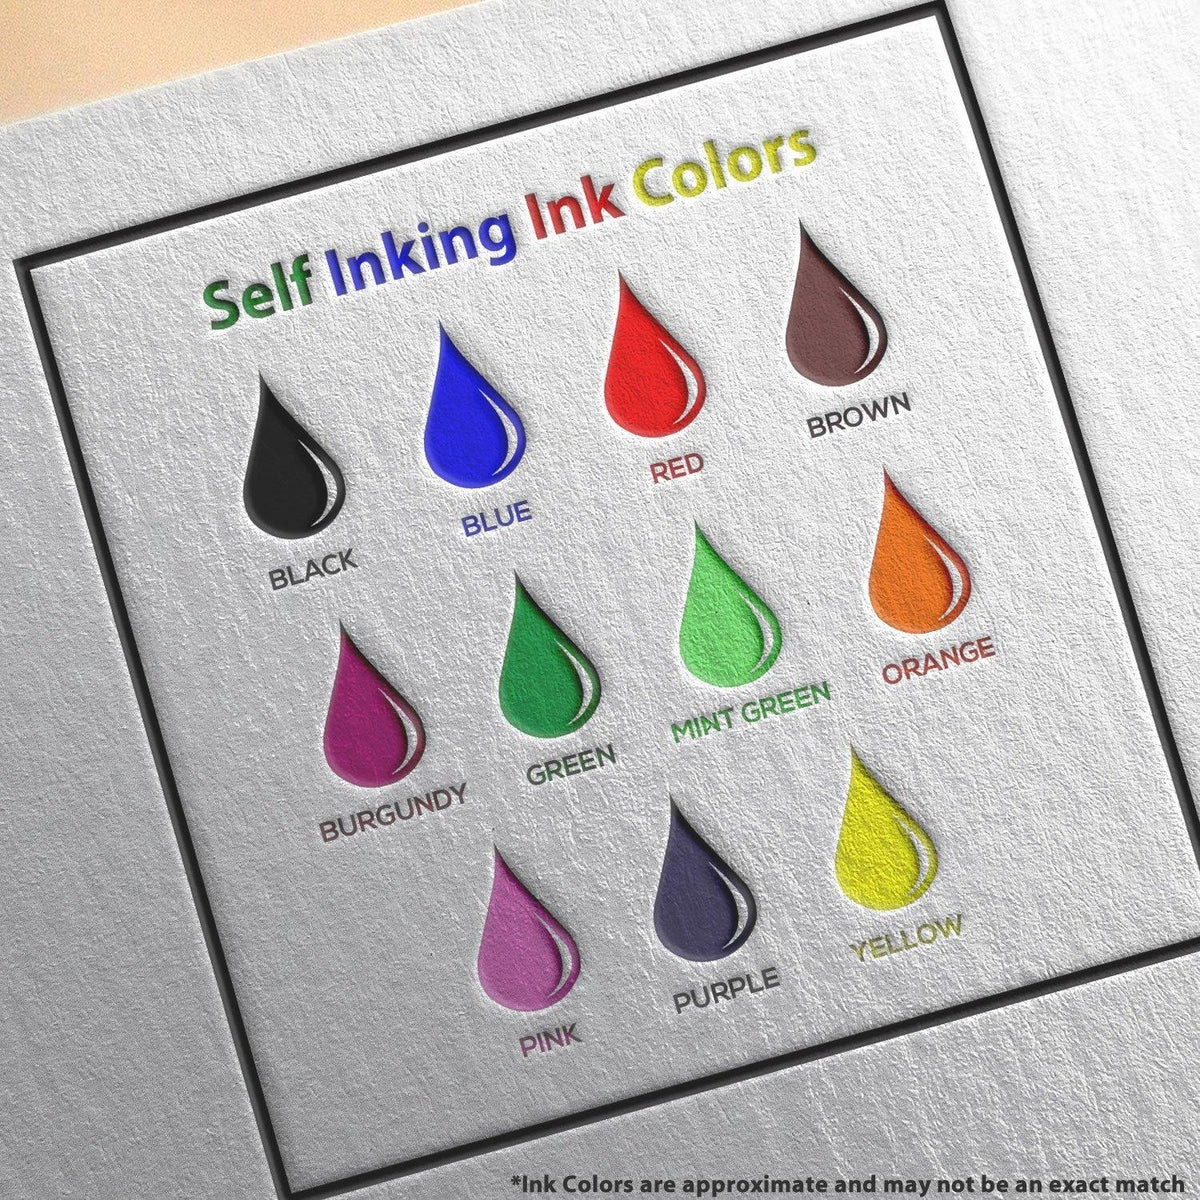 Self Inking Client Copy Stamp - Engineer Seal Stamps - Brand_Trodat, Impression Size_Small, Stamp Type_Self-Inking Stamp, Type of Use_Legal